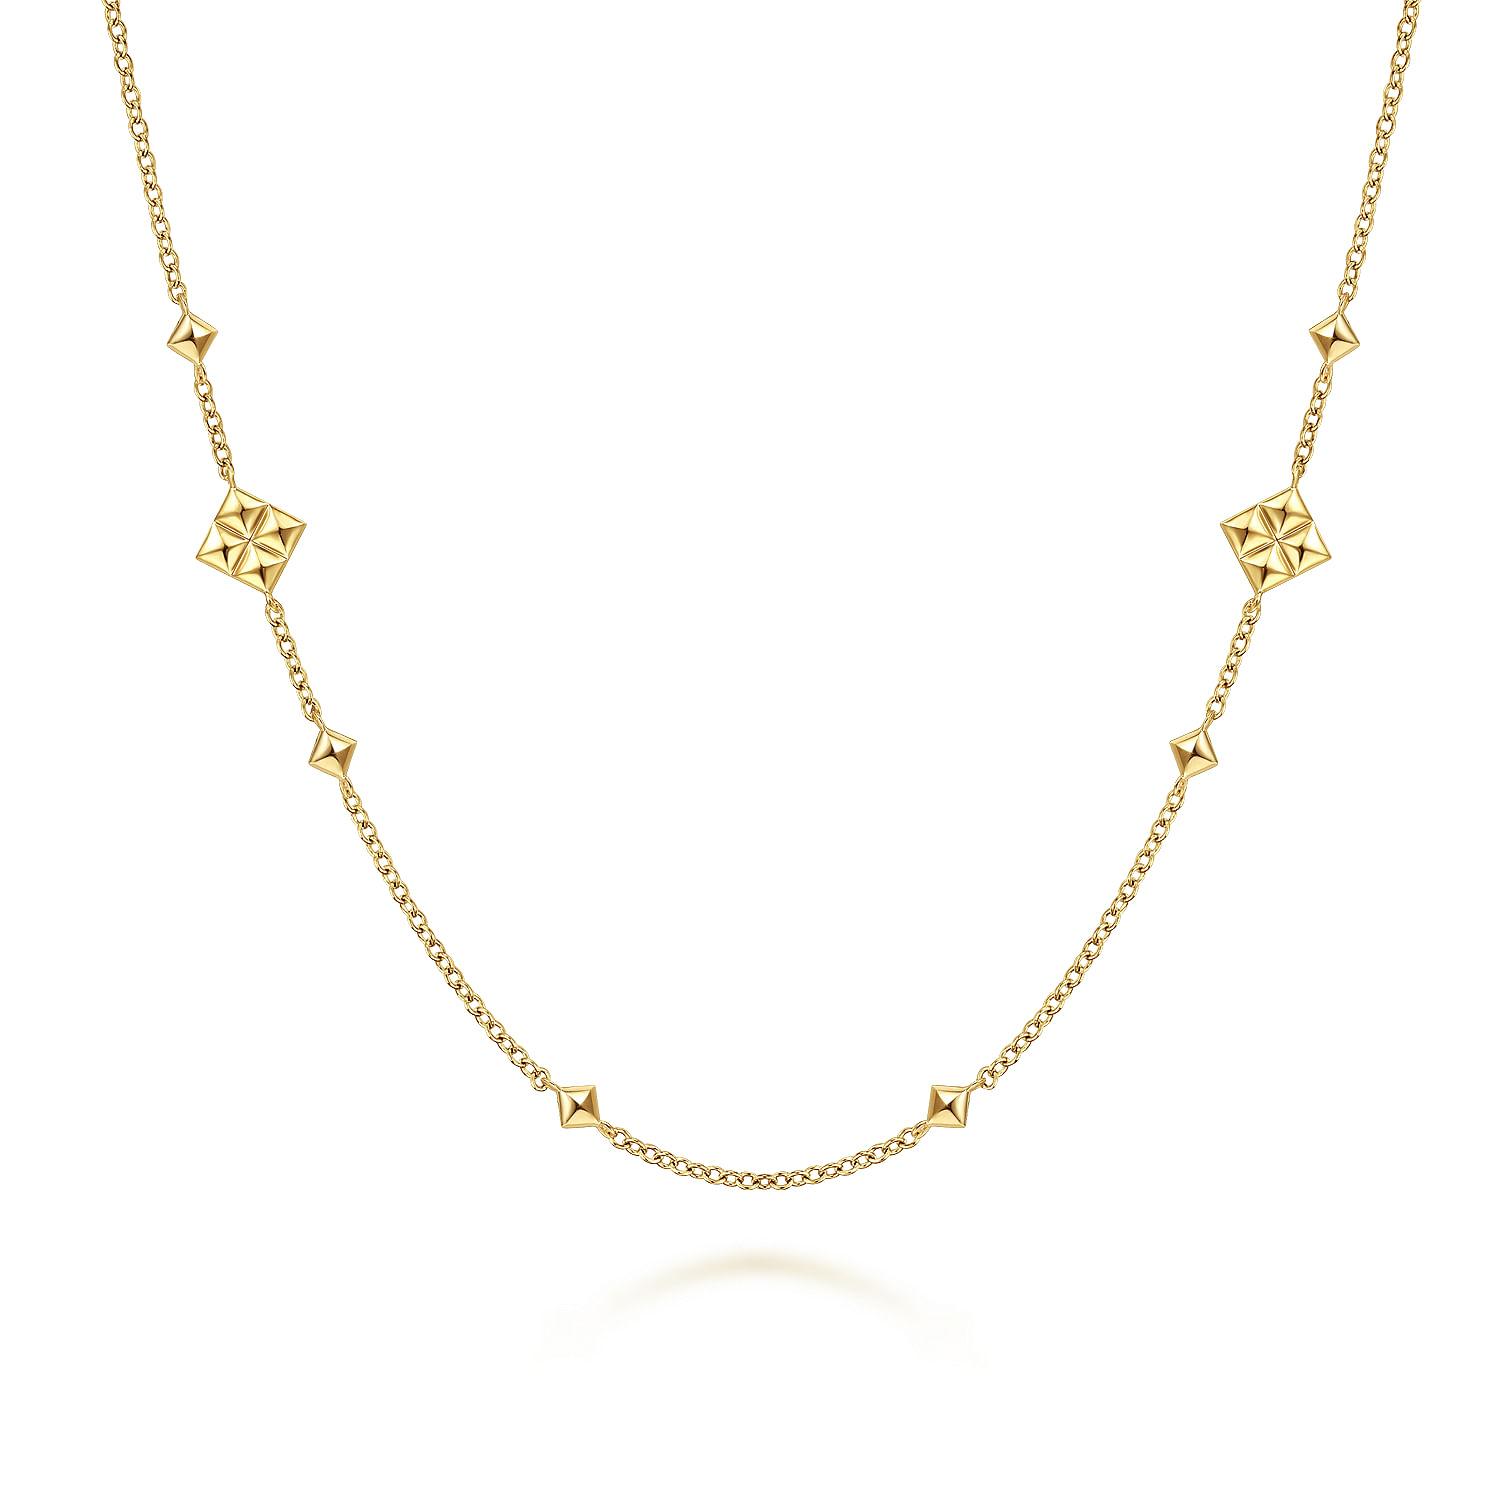 24 inch 14K Yellow Gold Pyramid Quatrefoil Station Necklace